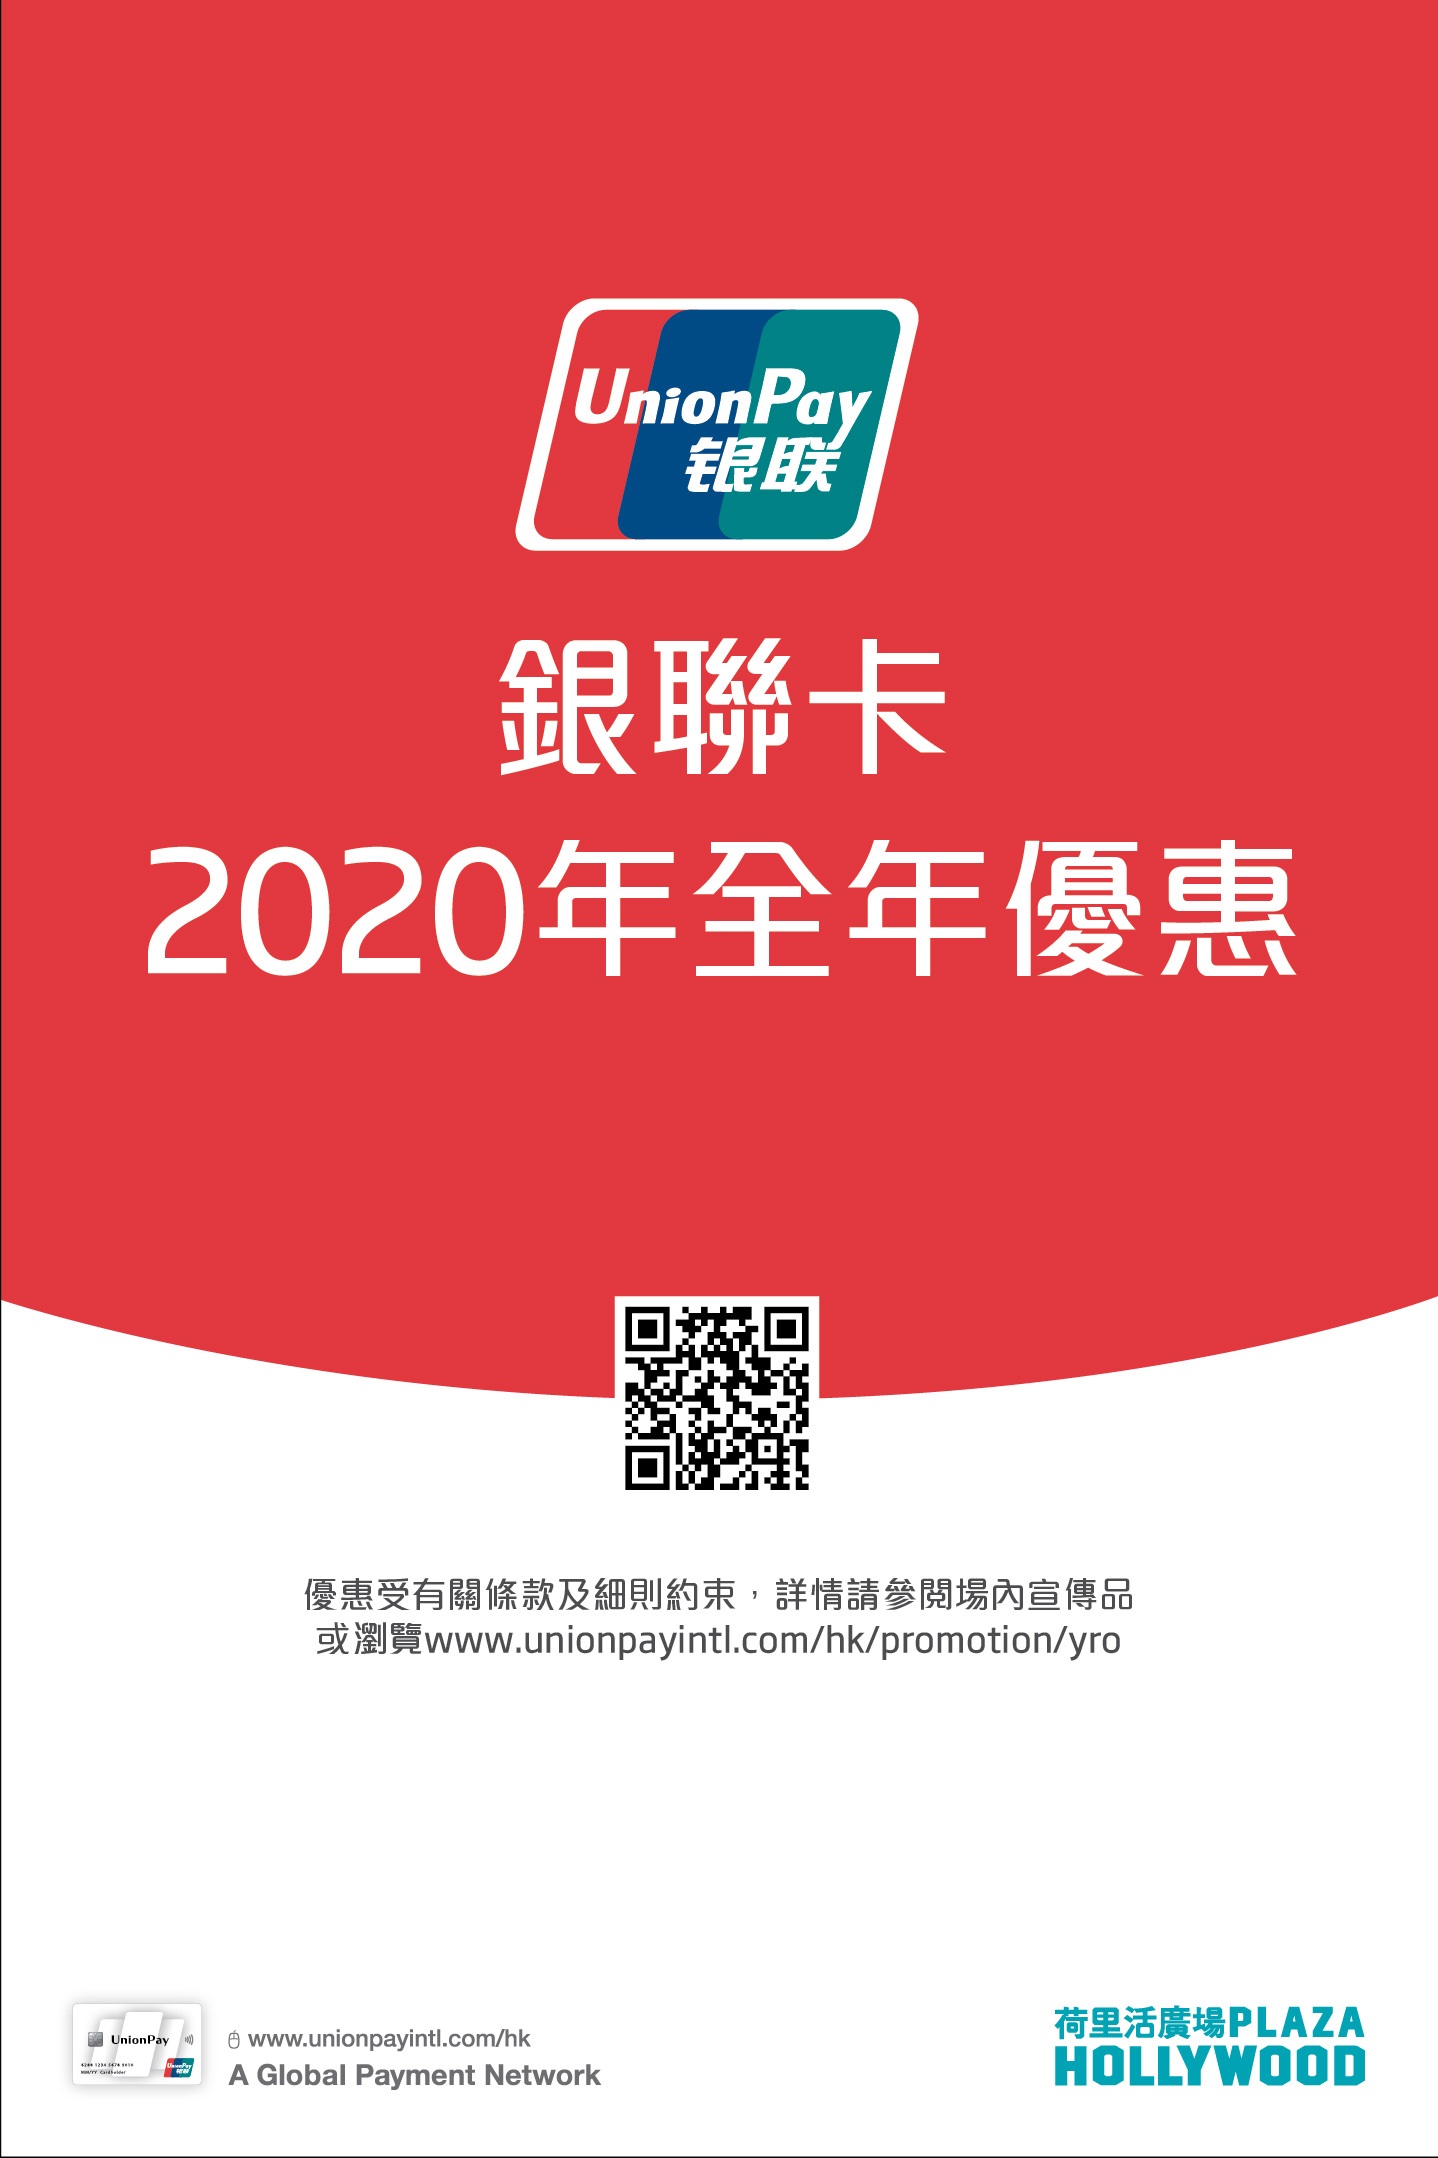 Shopping Privileges with UnionPay Card 2020